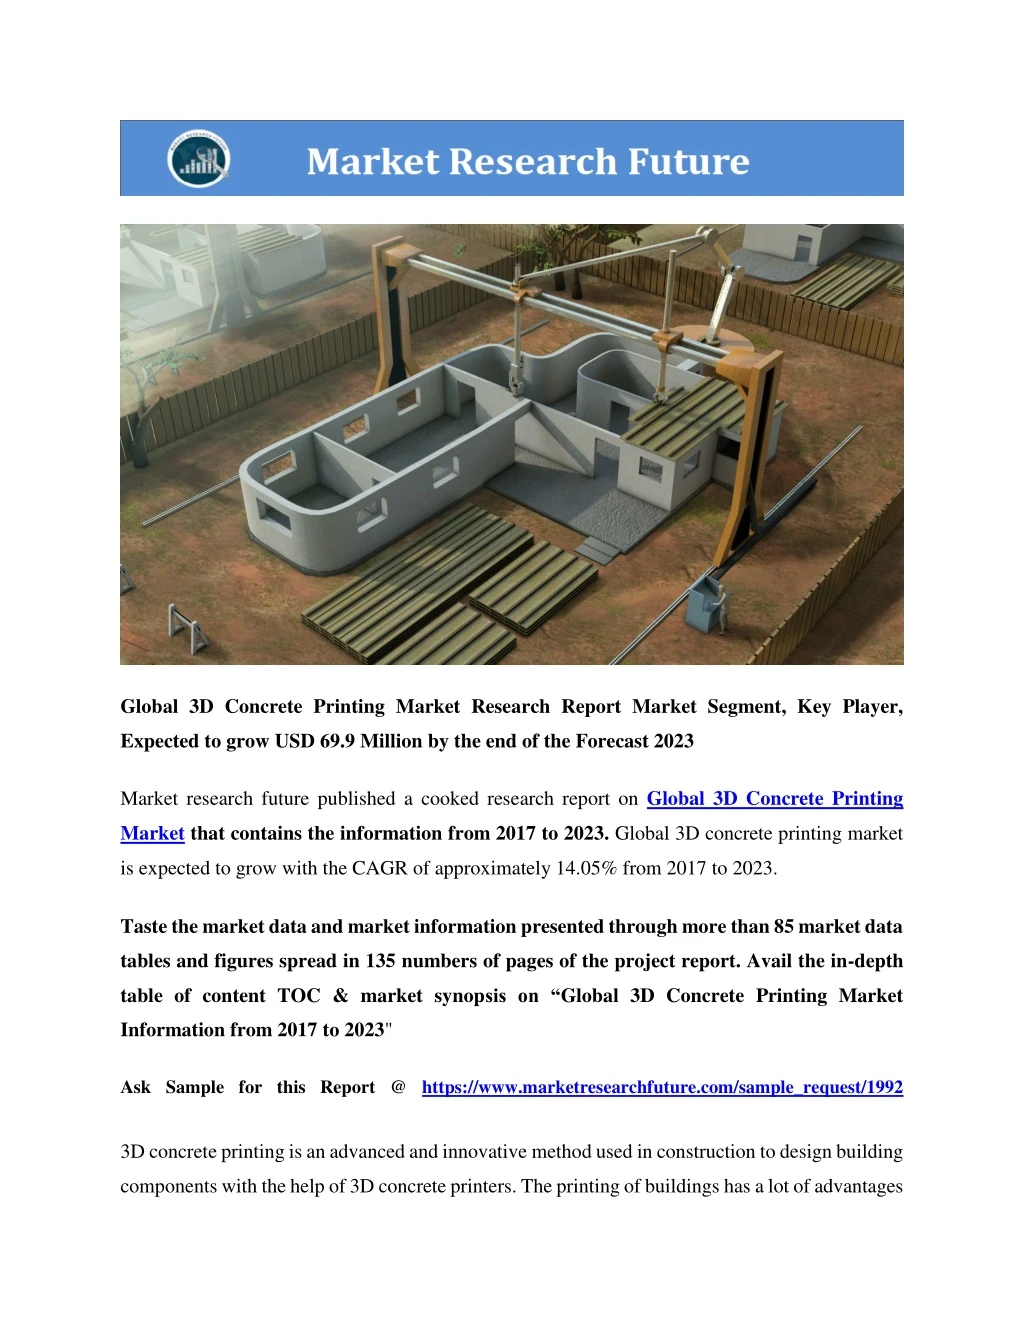 global 3d concrete printing market research